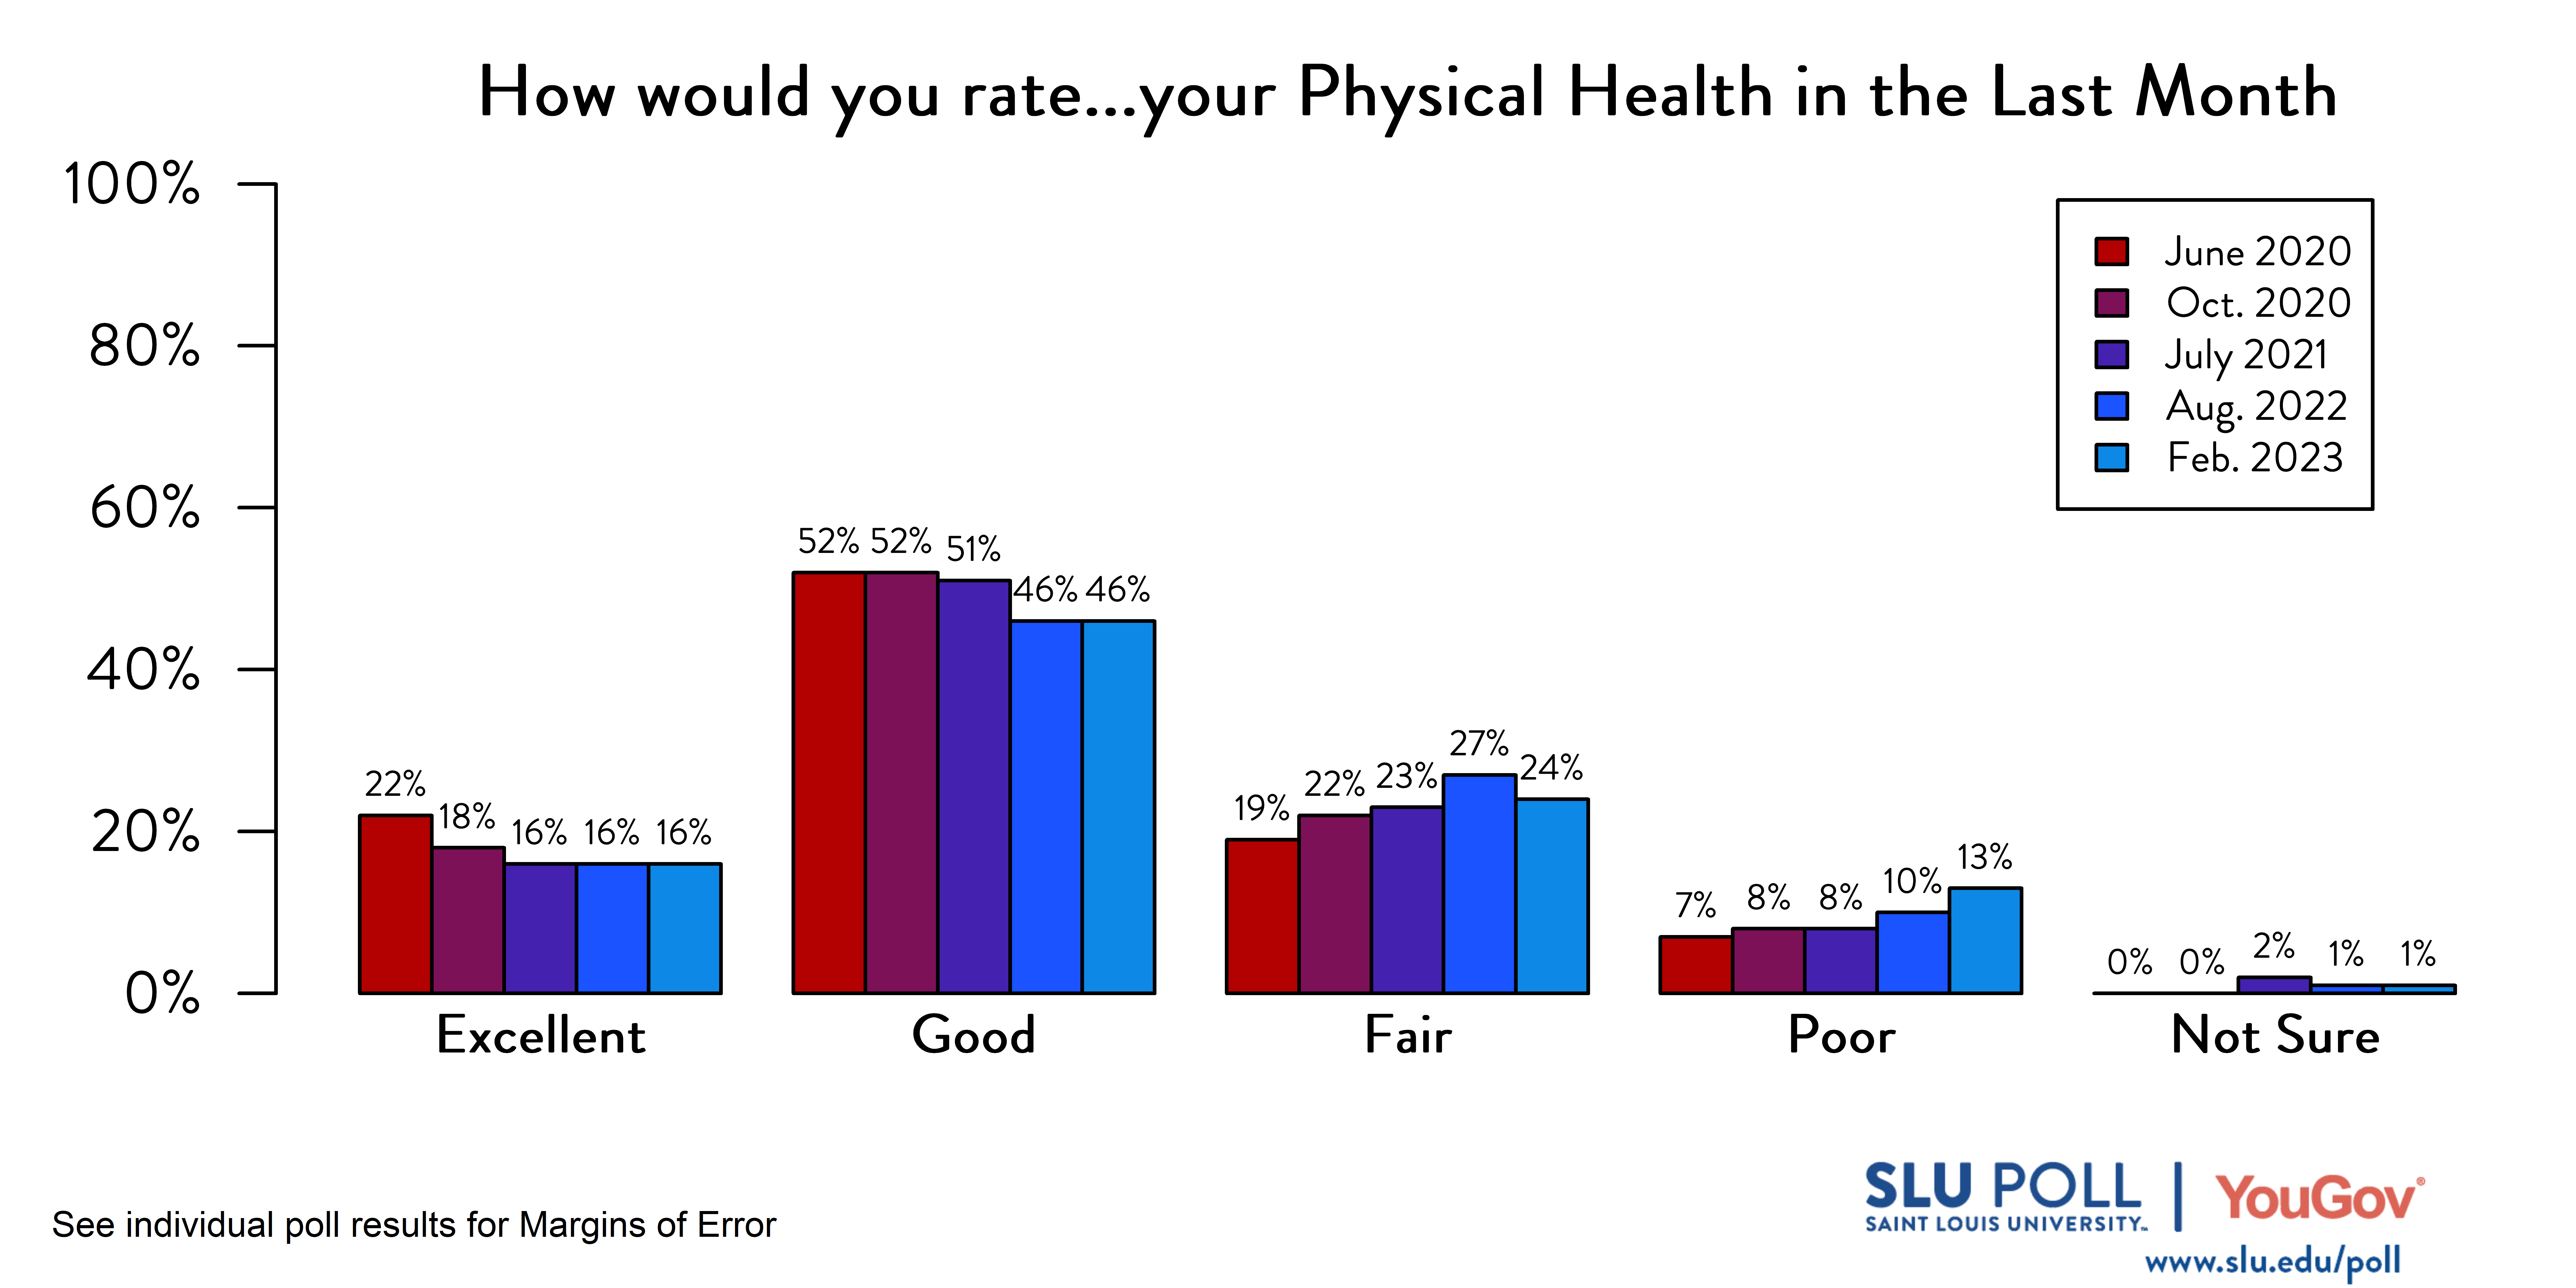 Likely voters' responses to 'How would you rate the condition of the following: Your physical health in the last month?'. June 2020 Voter Responses 22% Excellent, 52% Good, 19% Fair, 7% Poor, and 0% Not sure. October 2020 Voter Responses: 18% Excellent, 52% Good, 22% Fair, 8% Poor, and 0% Not sure. July 2021 Voter Responses: 16% Excellent, 51% Good, 23% Fair, 8% Poor, and 2% Not sure. August 2022 Voter Responses: 16% Excellent, 46% Good, 27% Fair, 10% Poor, and 1% Not sure. February 2023 Voter Responses: 16% Excellent, 46% Good, 24% Fair, 13% Poor, and 1% Not sure.